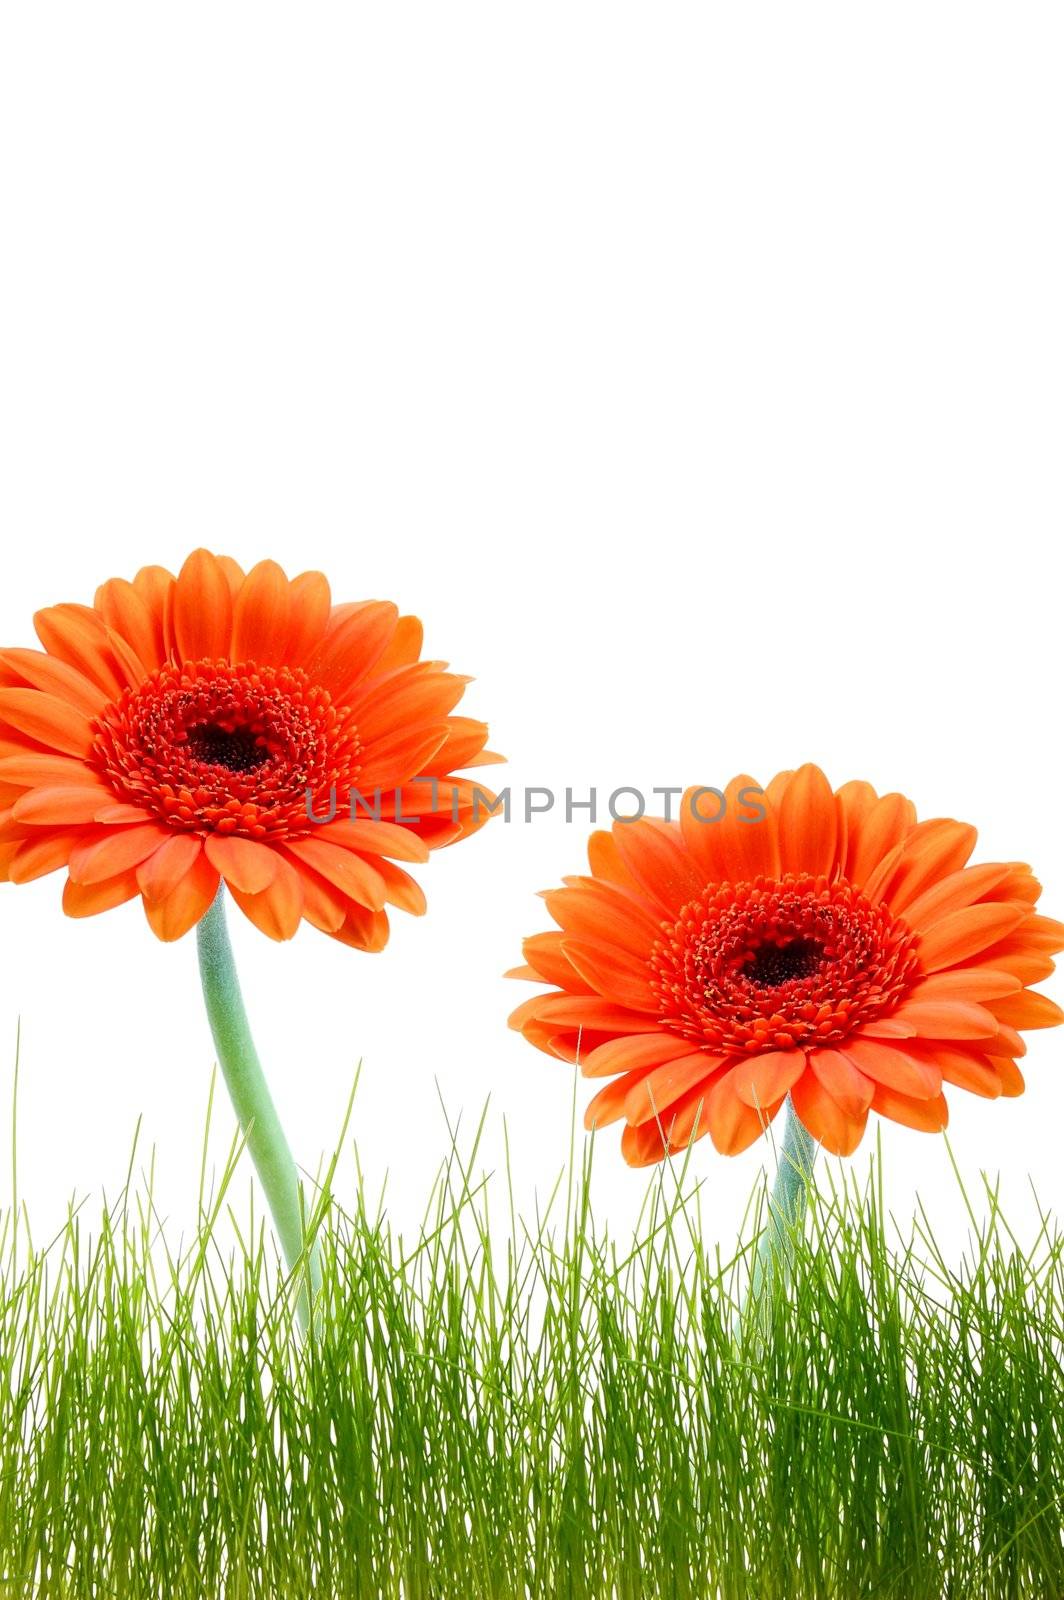 isolated flower background with grass and copyspace for your text